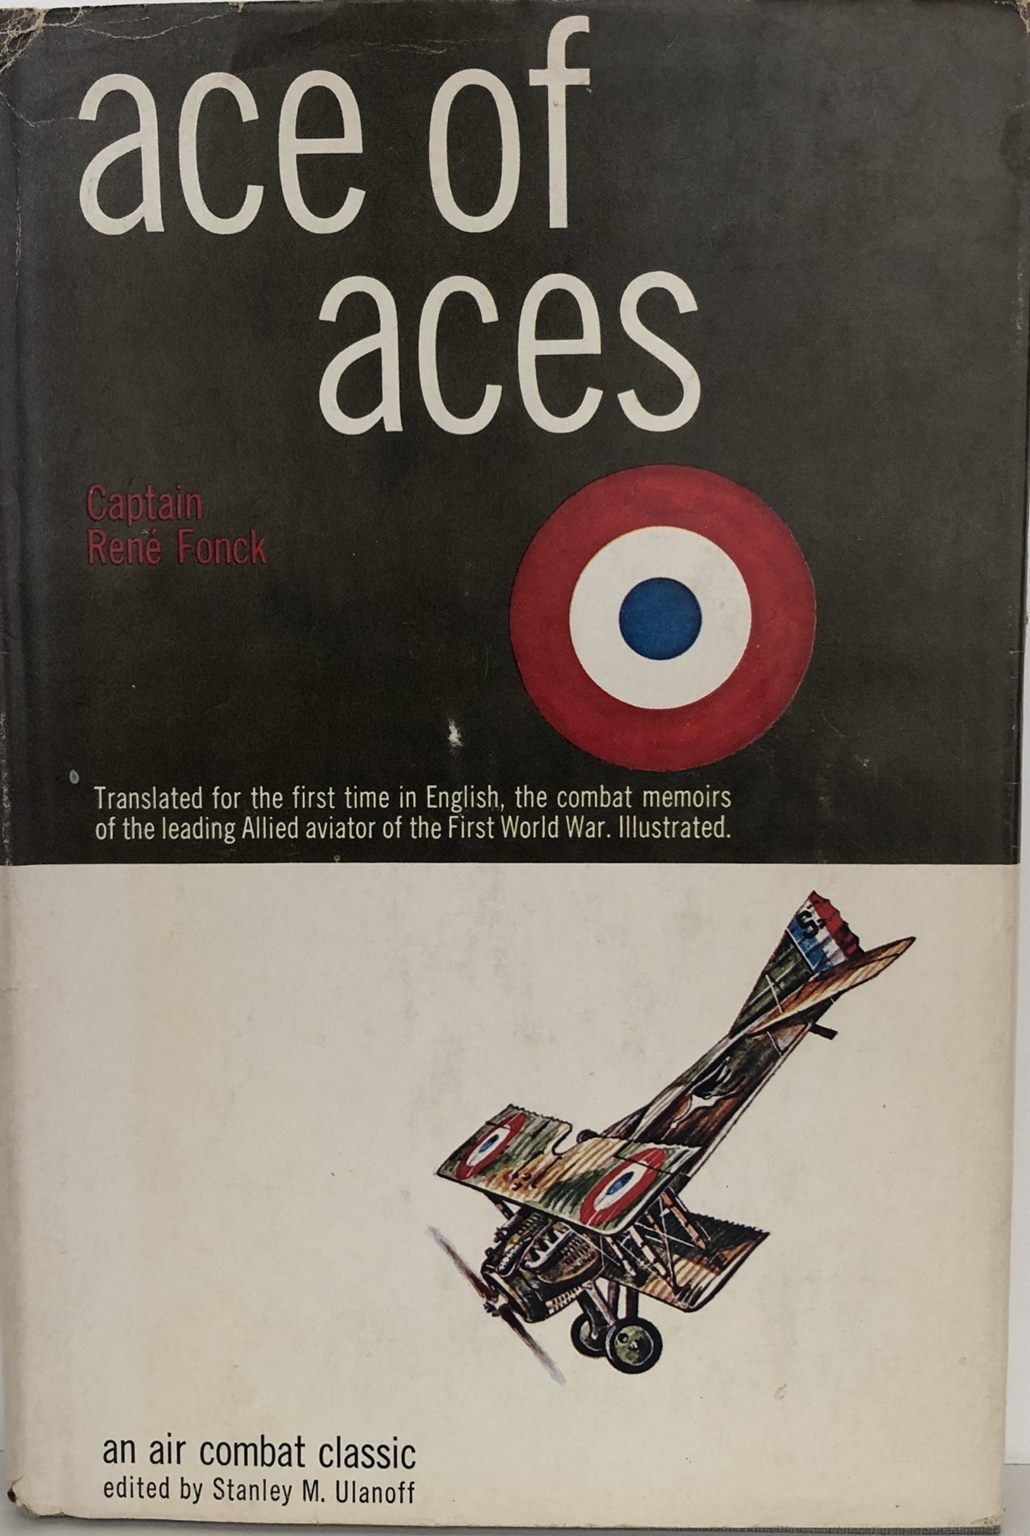 ACE OF ACES: The Combat Memoirs of the Leading Allied Aviator of WW1